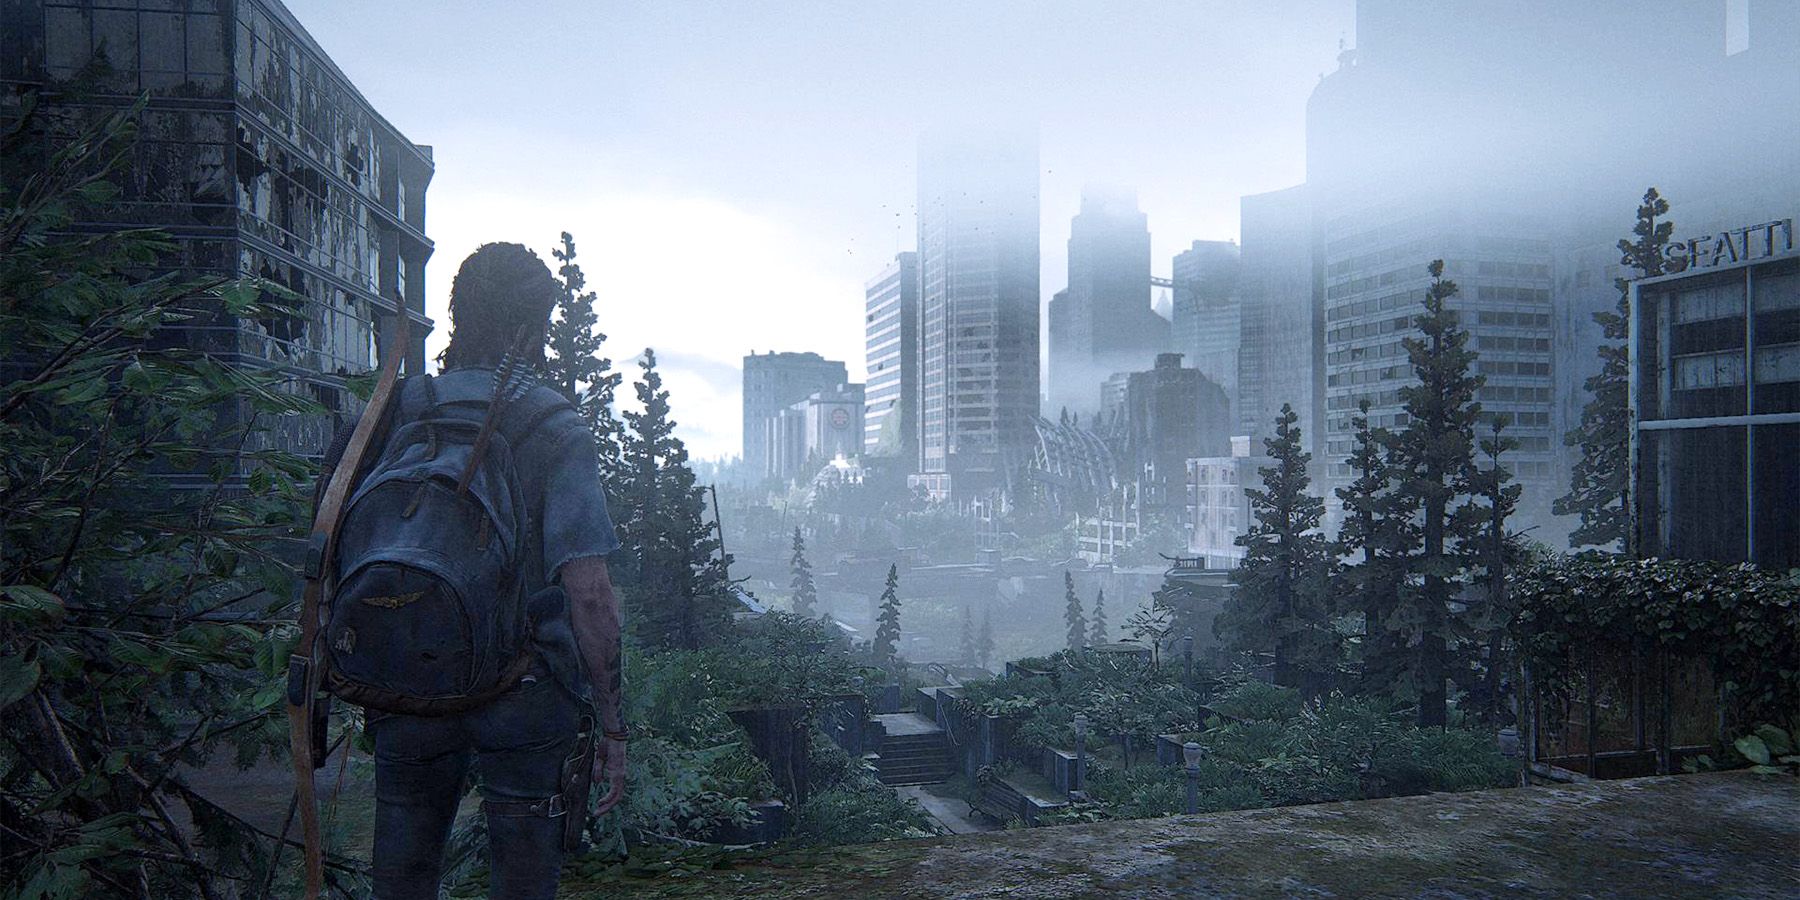 The Last of Us' multiplayer game will be out when it's ready